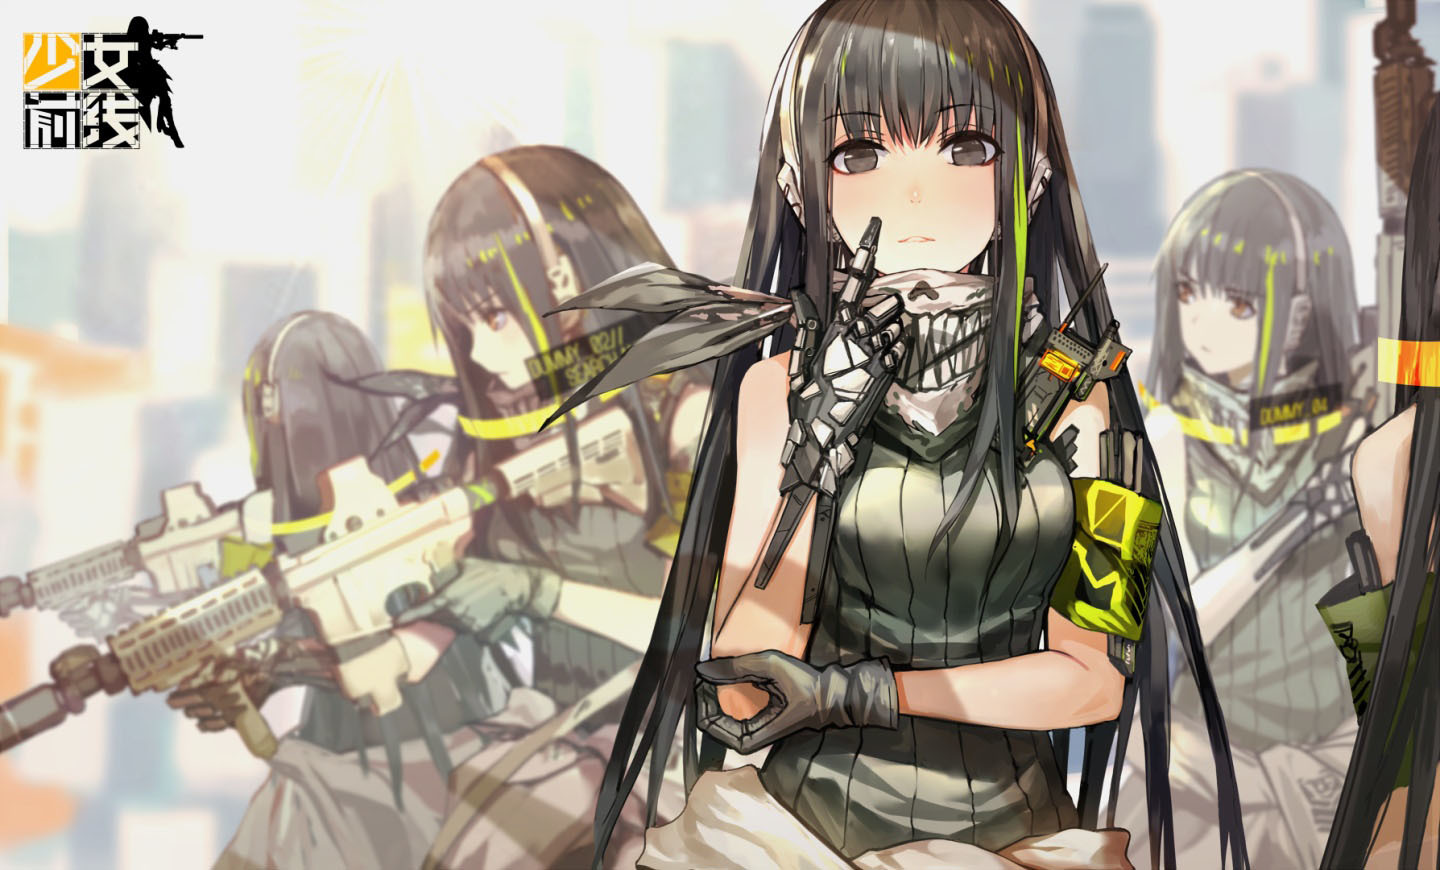 Girls' Frontline: Taking the 2D Game to Europe